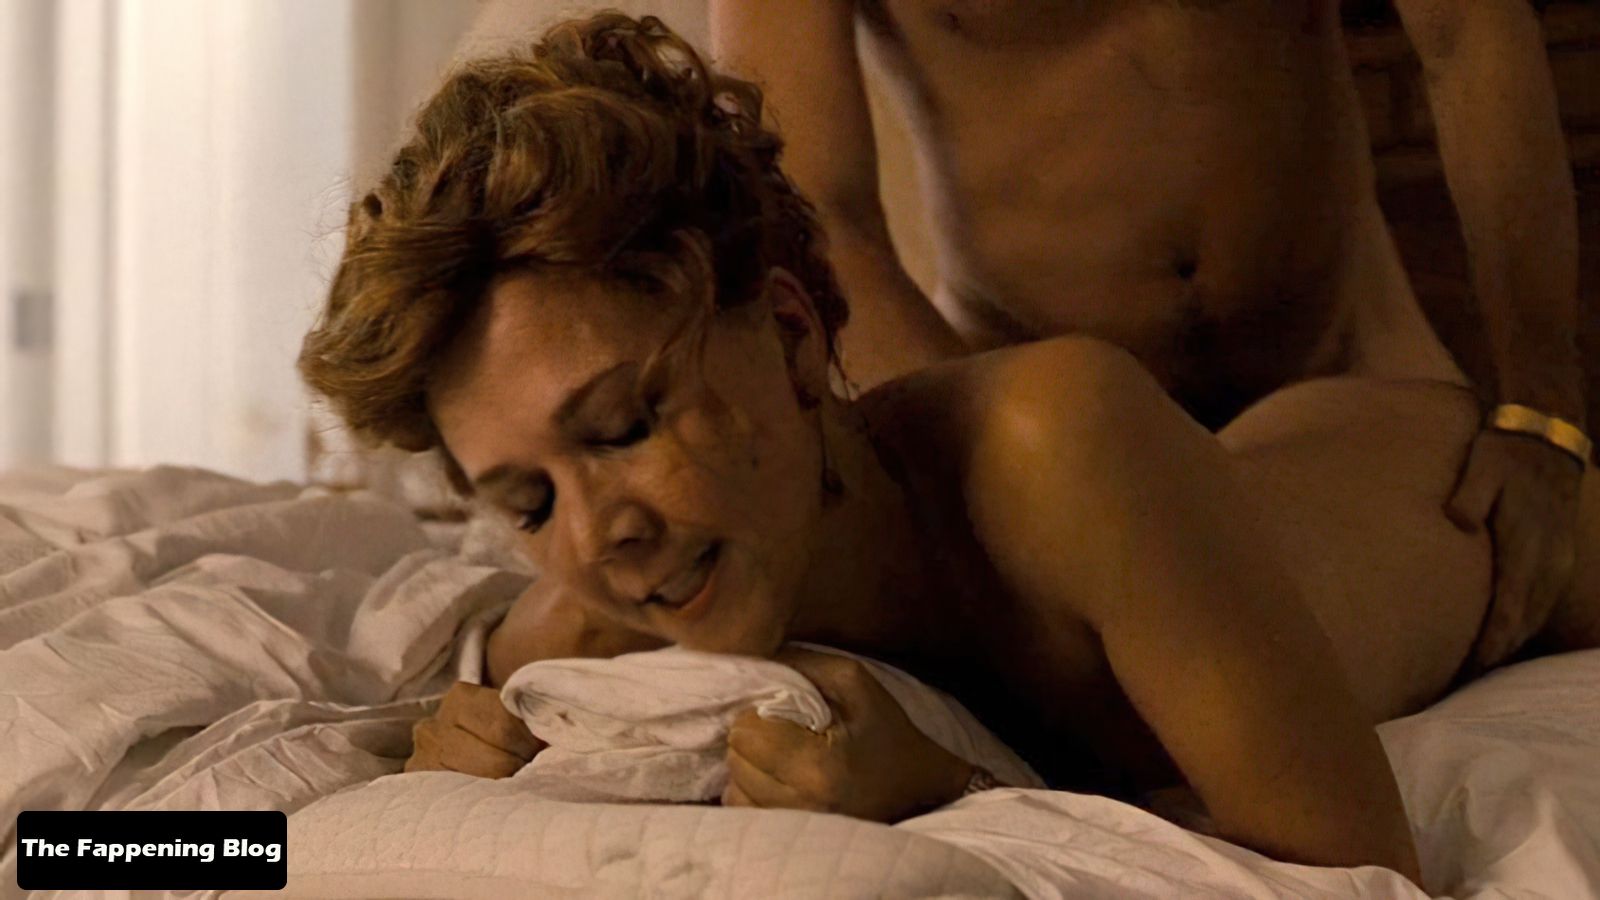 Maggie-Gyllenhaal-Nude-Porn-Photo-Collection-The-Fappening-Blog-12.jpg